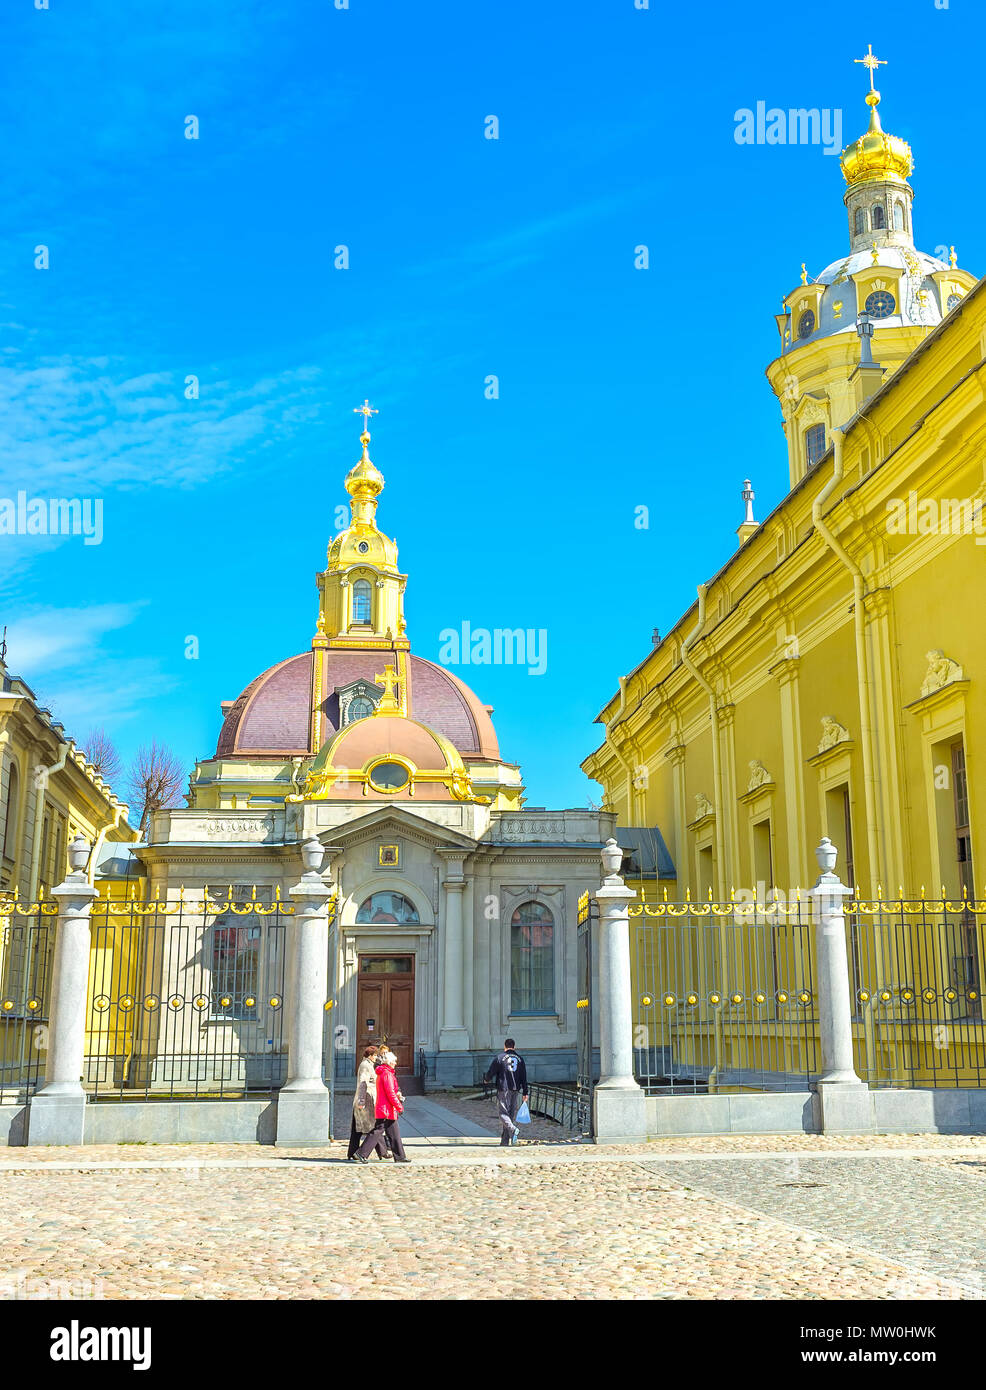 SAINT PETERSBURG, RUSSIA - APRIL 27, 2015:  The entrance to the Grand Ducal Burial Vault, the beautiful architectural structure that adjoins to Peter  Stock Photo